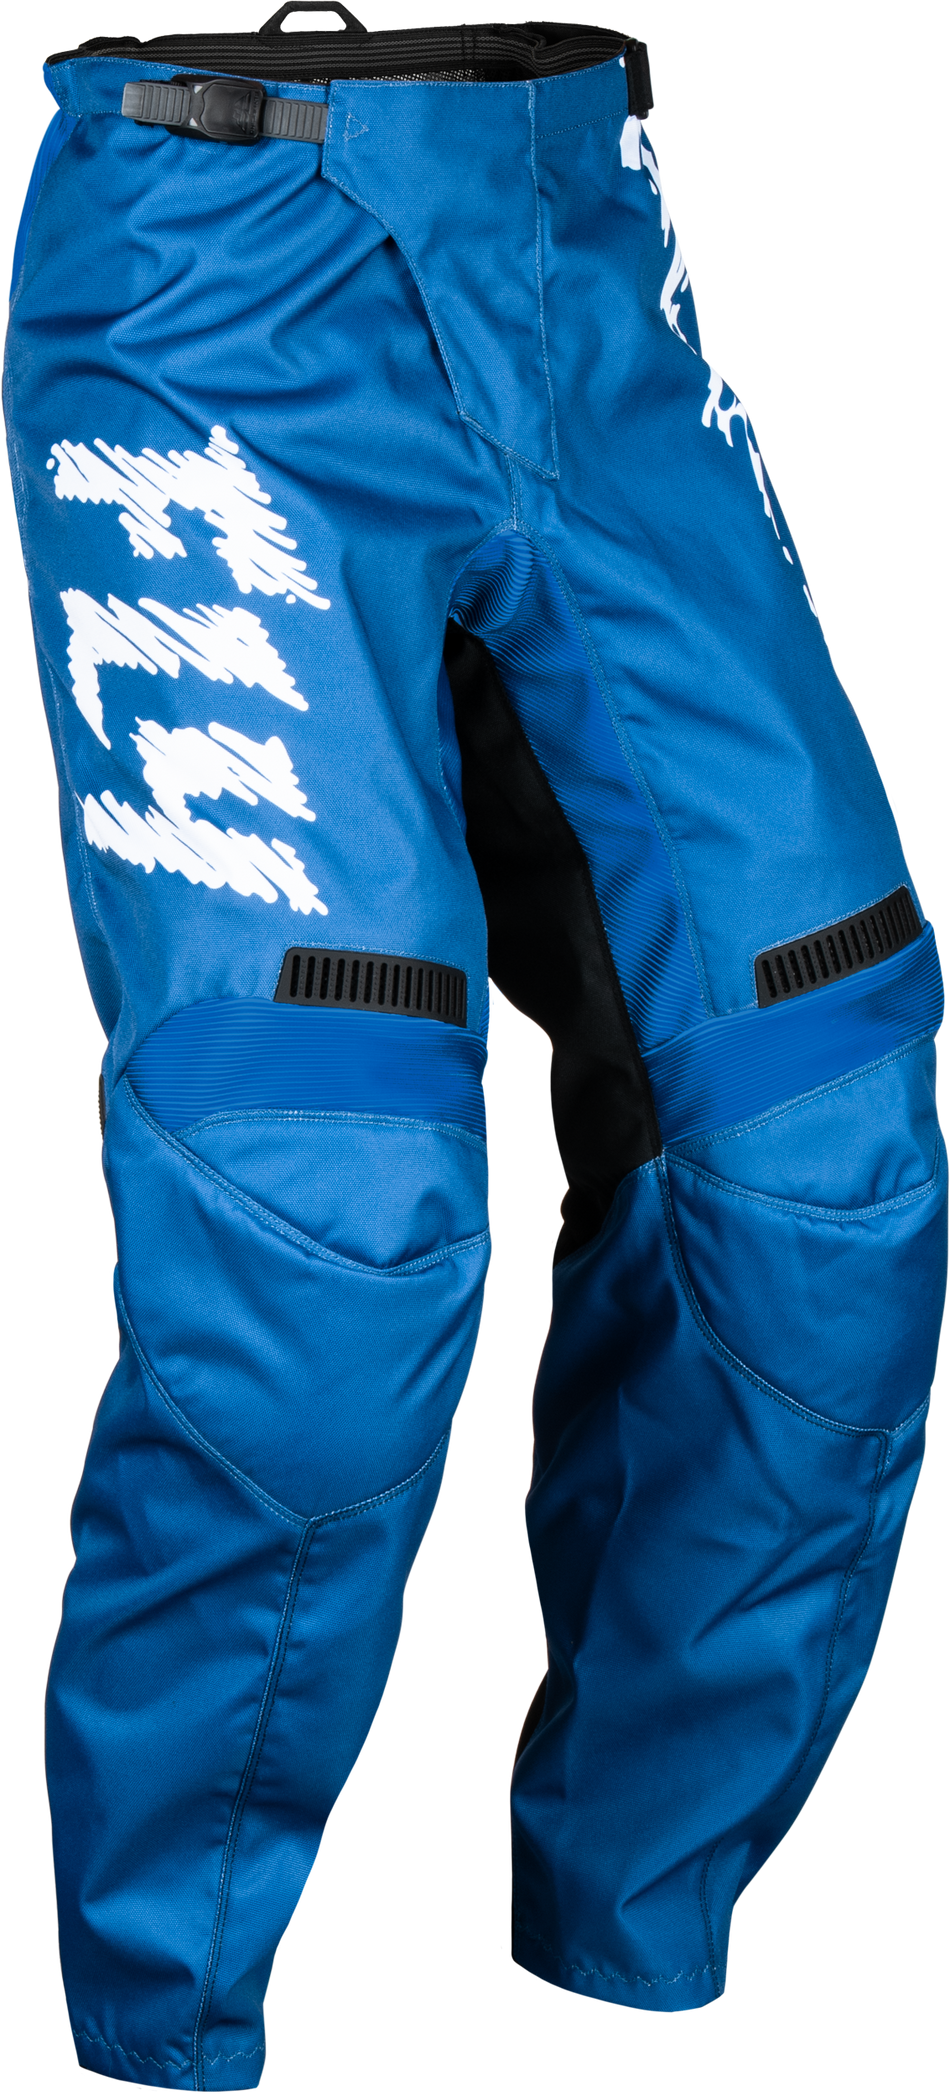 FLY RACING Youth F-16 Pants True Blue/White Sz 18 377-23318